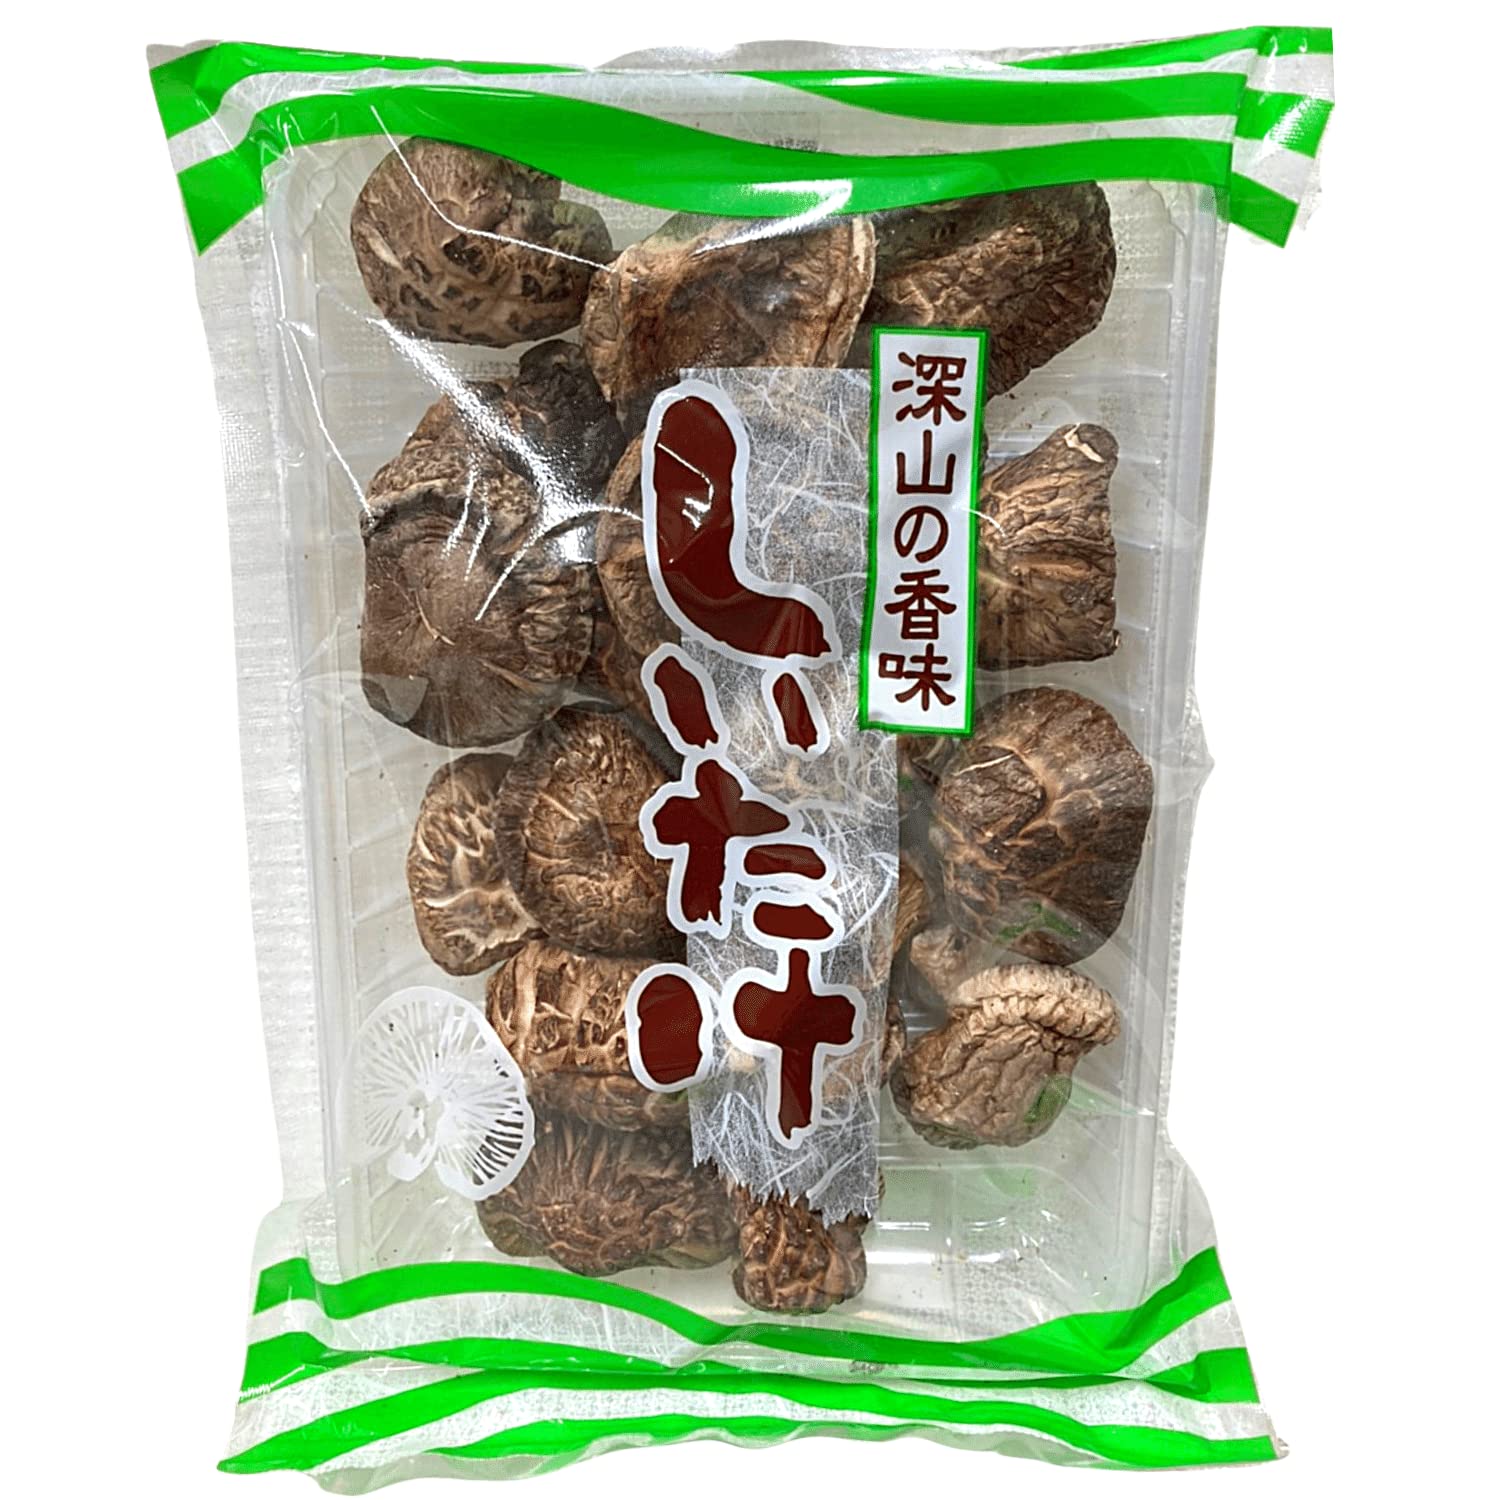 Nagai Co., Ltd., Expands Its Market Presence In The United States With The Launch Of Nori Seaweed & Shiitake Products.